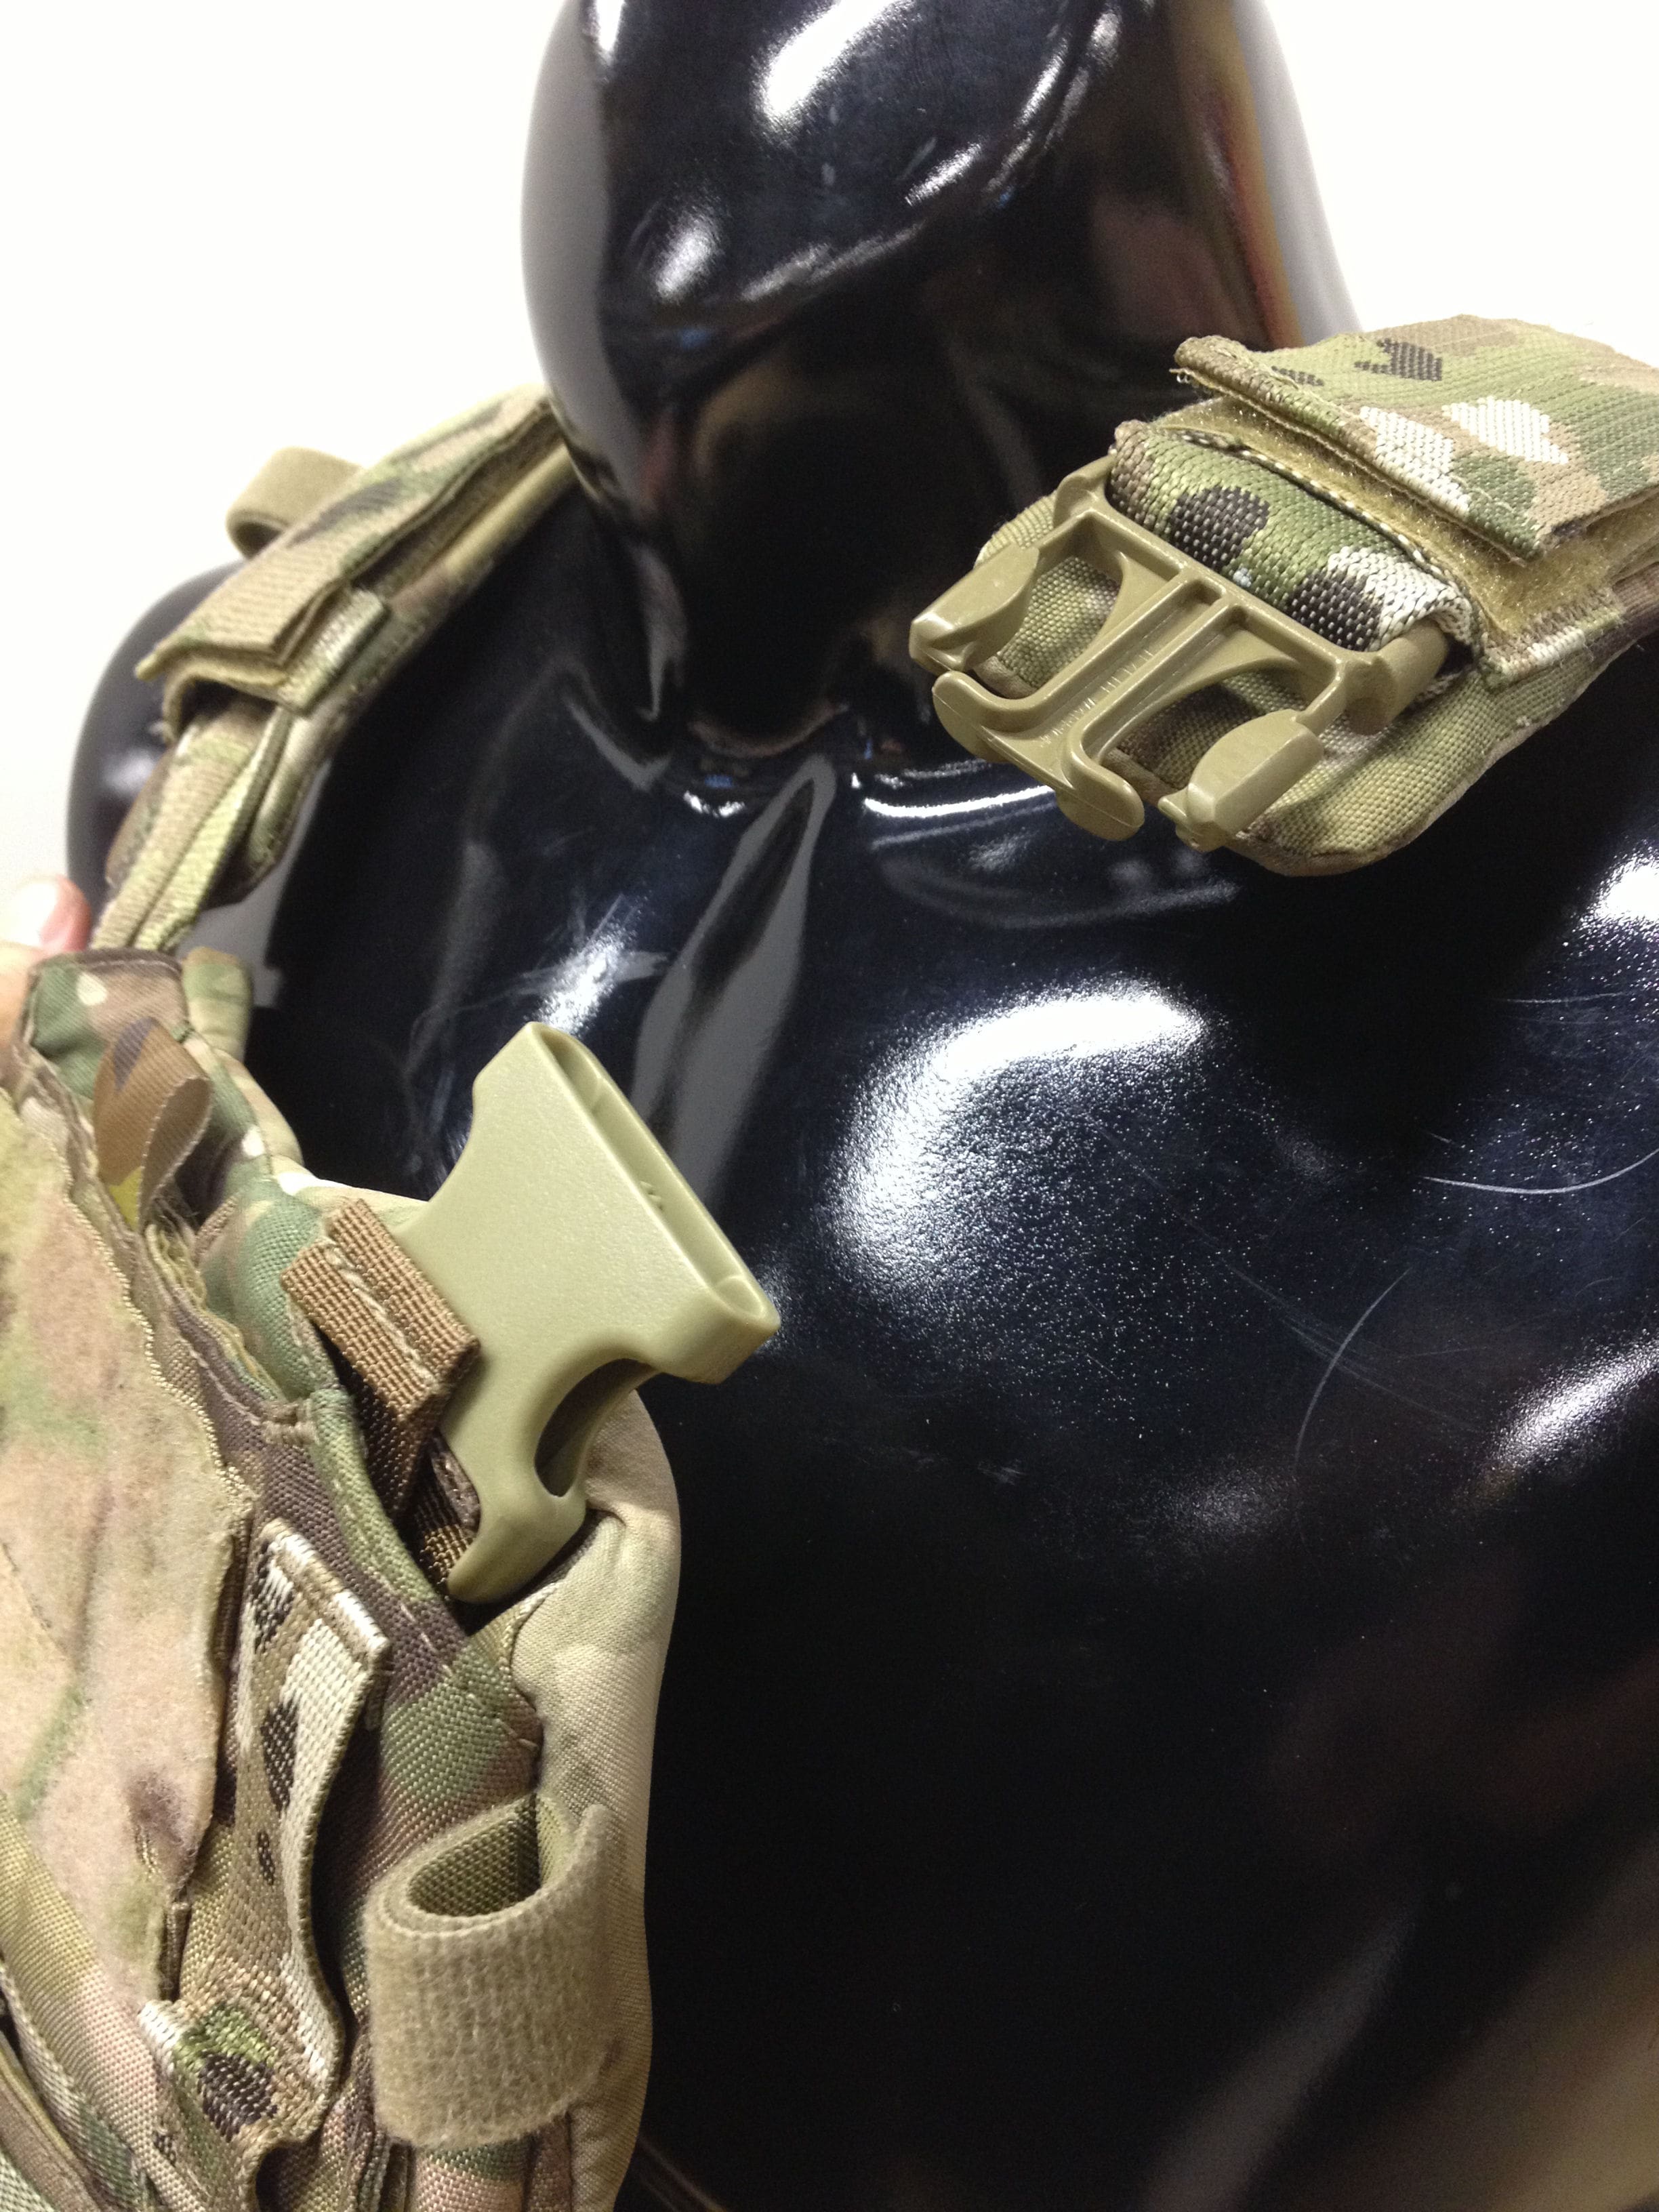 Eagle Industries SOFBAV Aero Assault - Soldier Systems Daily